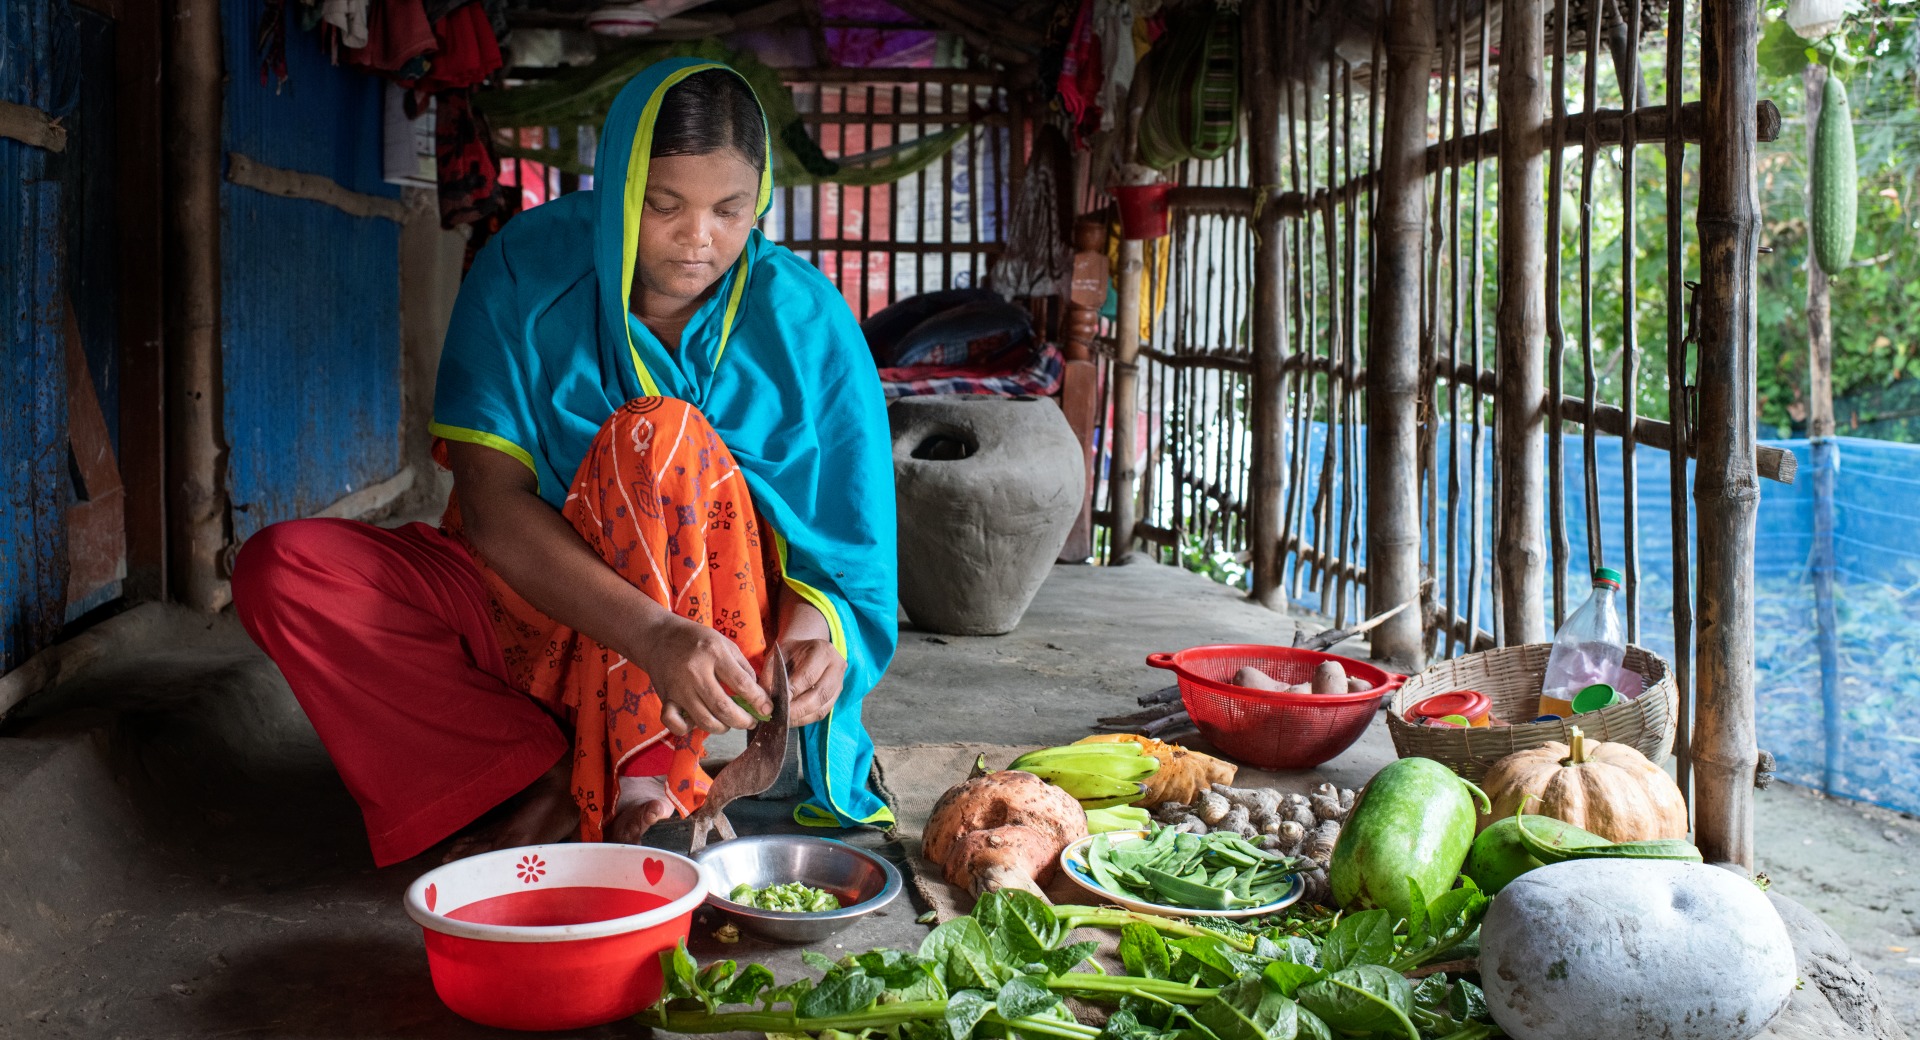 A woman prepares vegetables and fruits for a family meal.